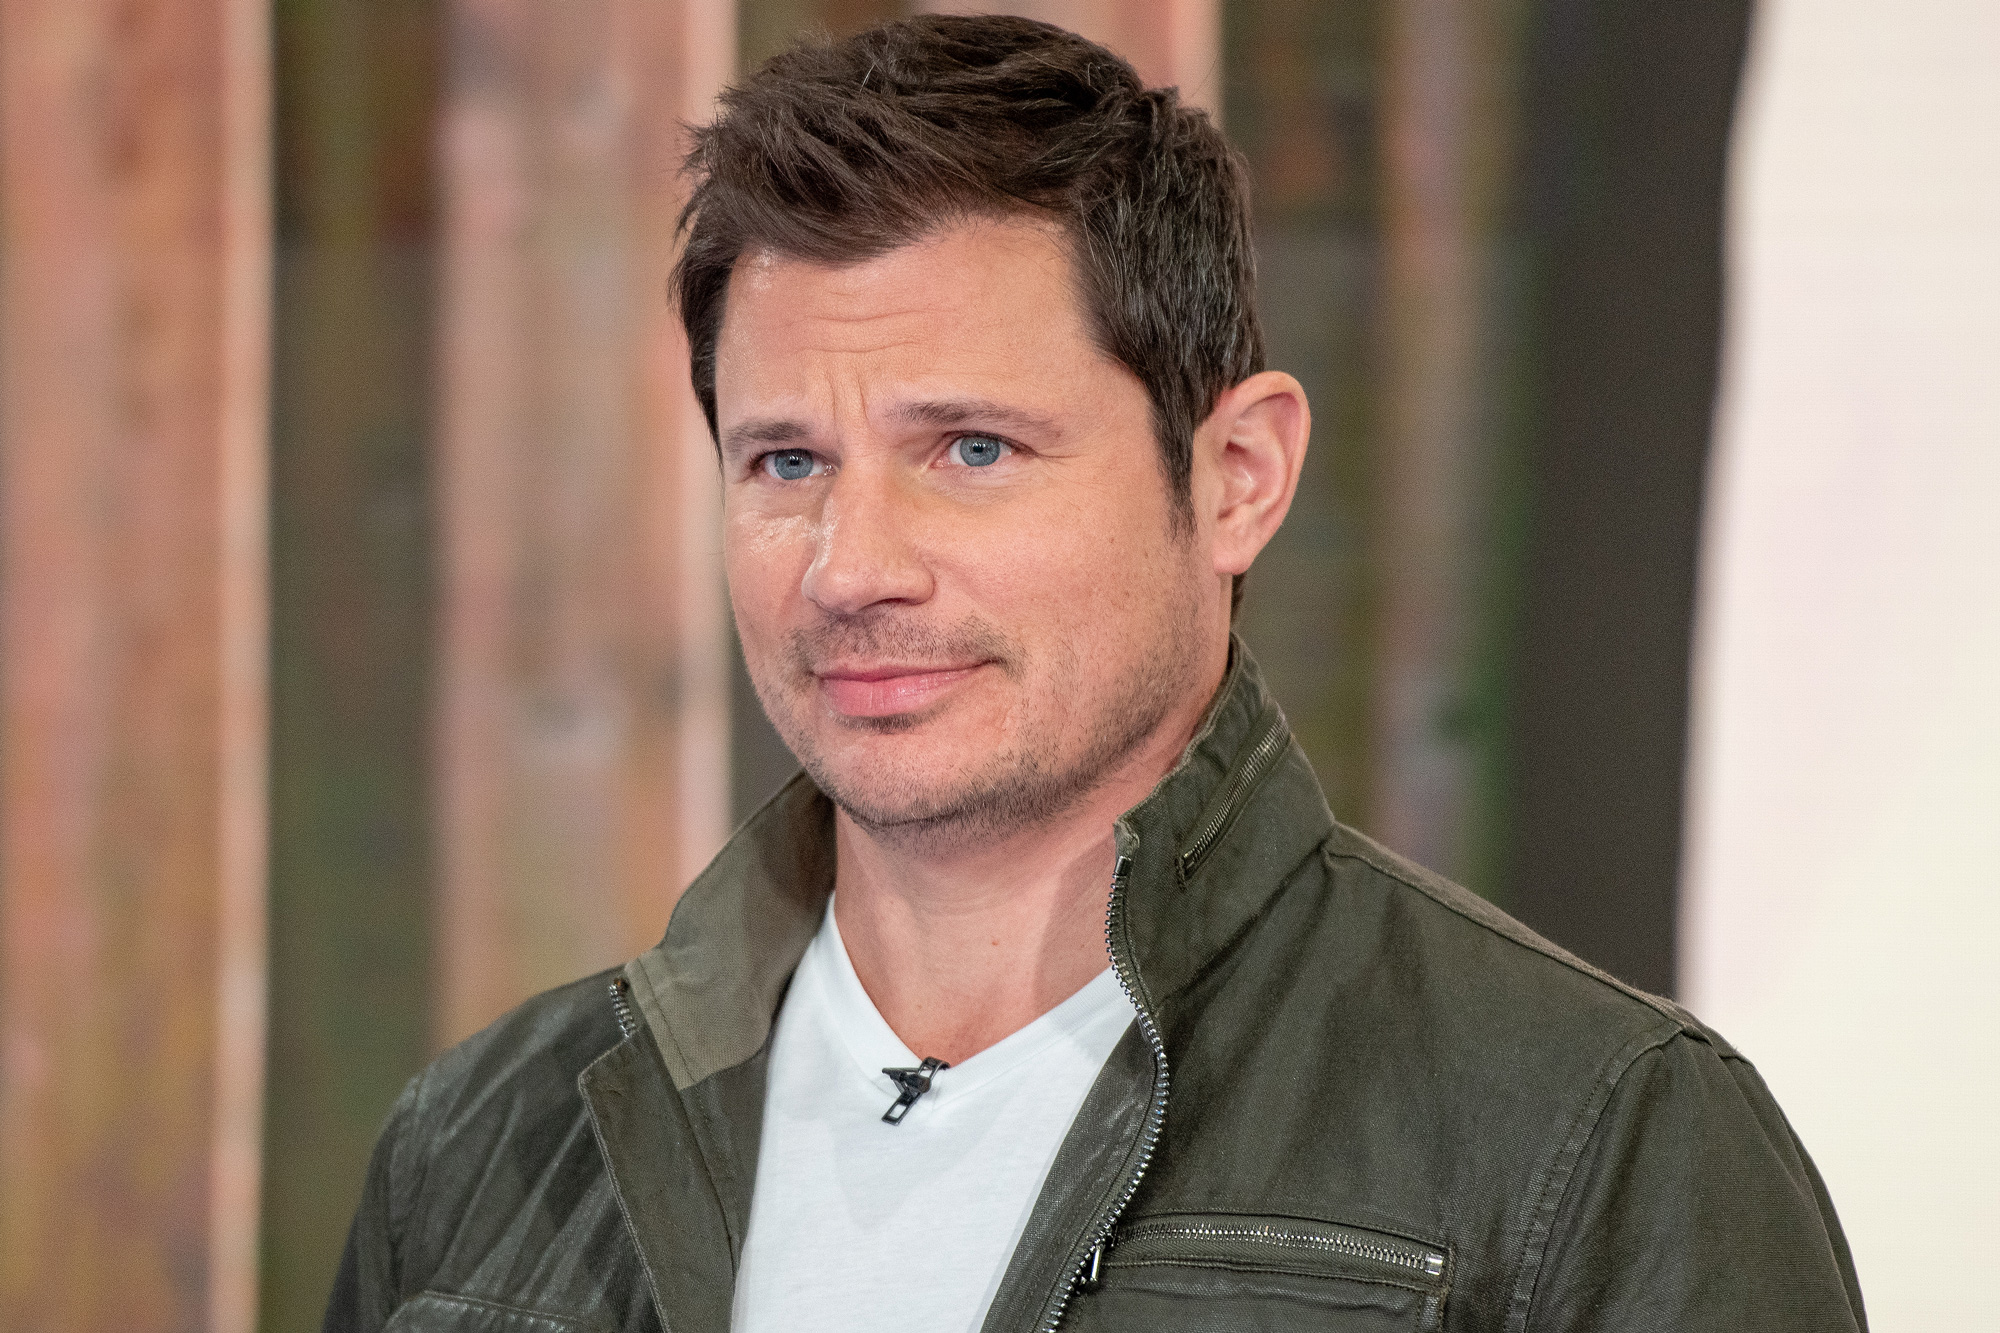 Nick Lachey Visits "Fox & Friends" to discuss the "American Kennel Club" show at Fox News Channel Studios on February 05, 2019 in New York City.